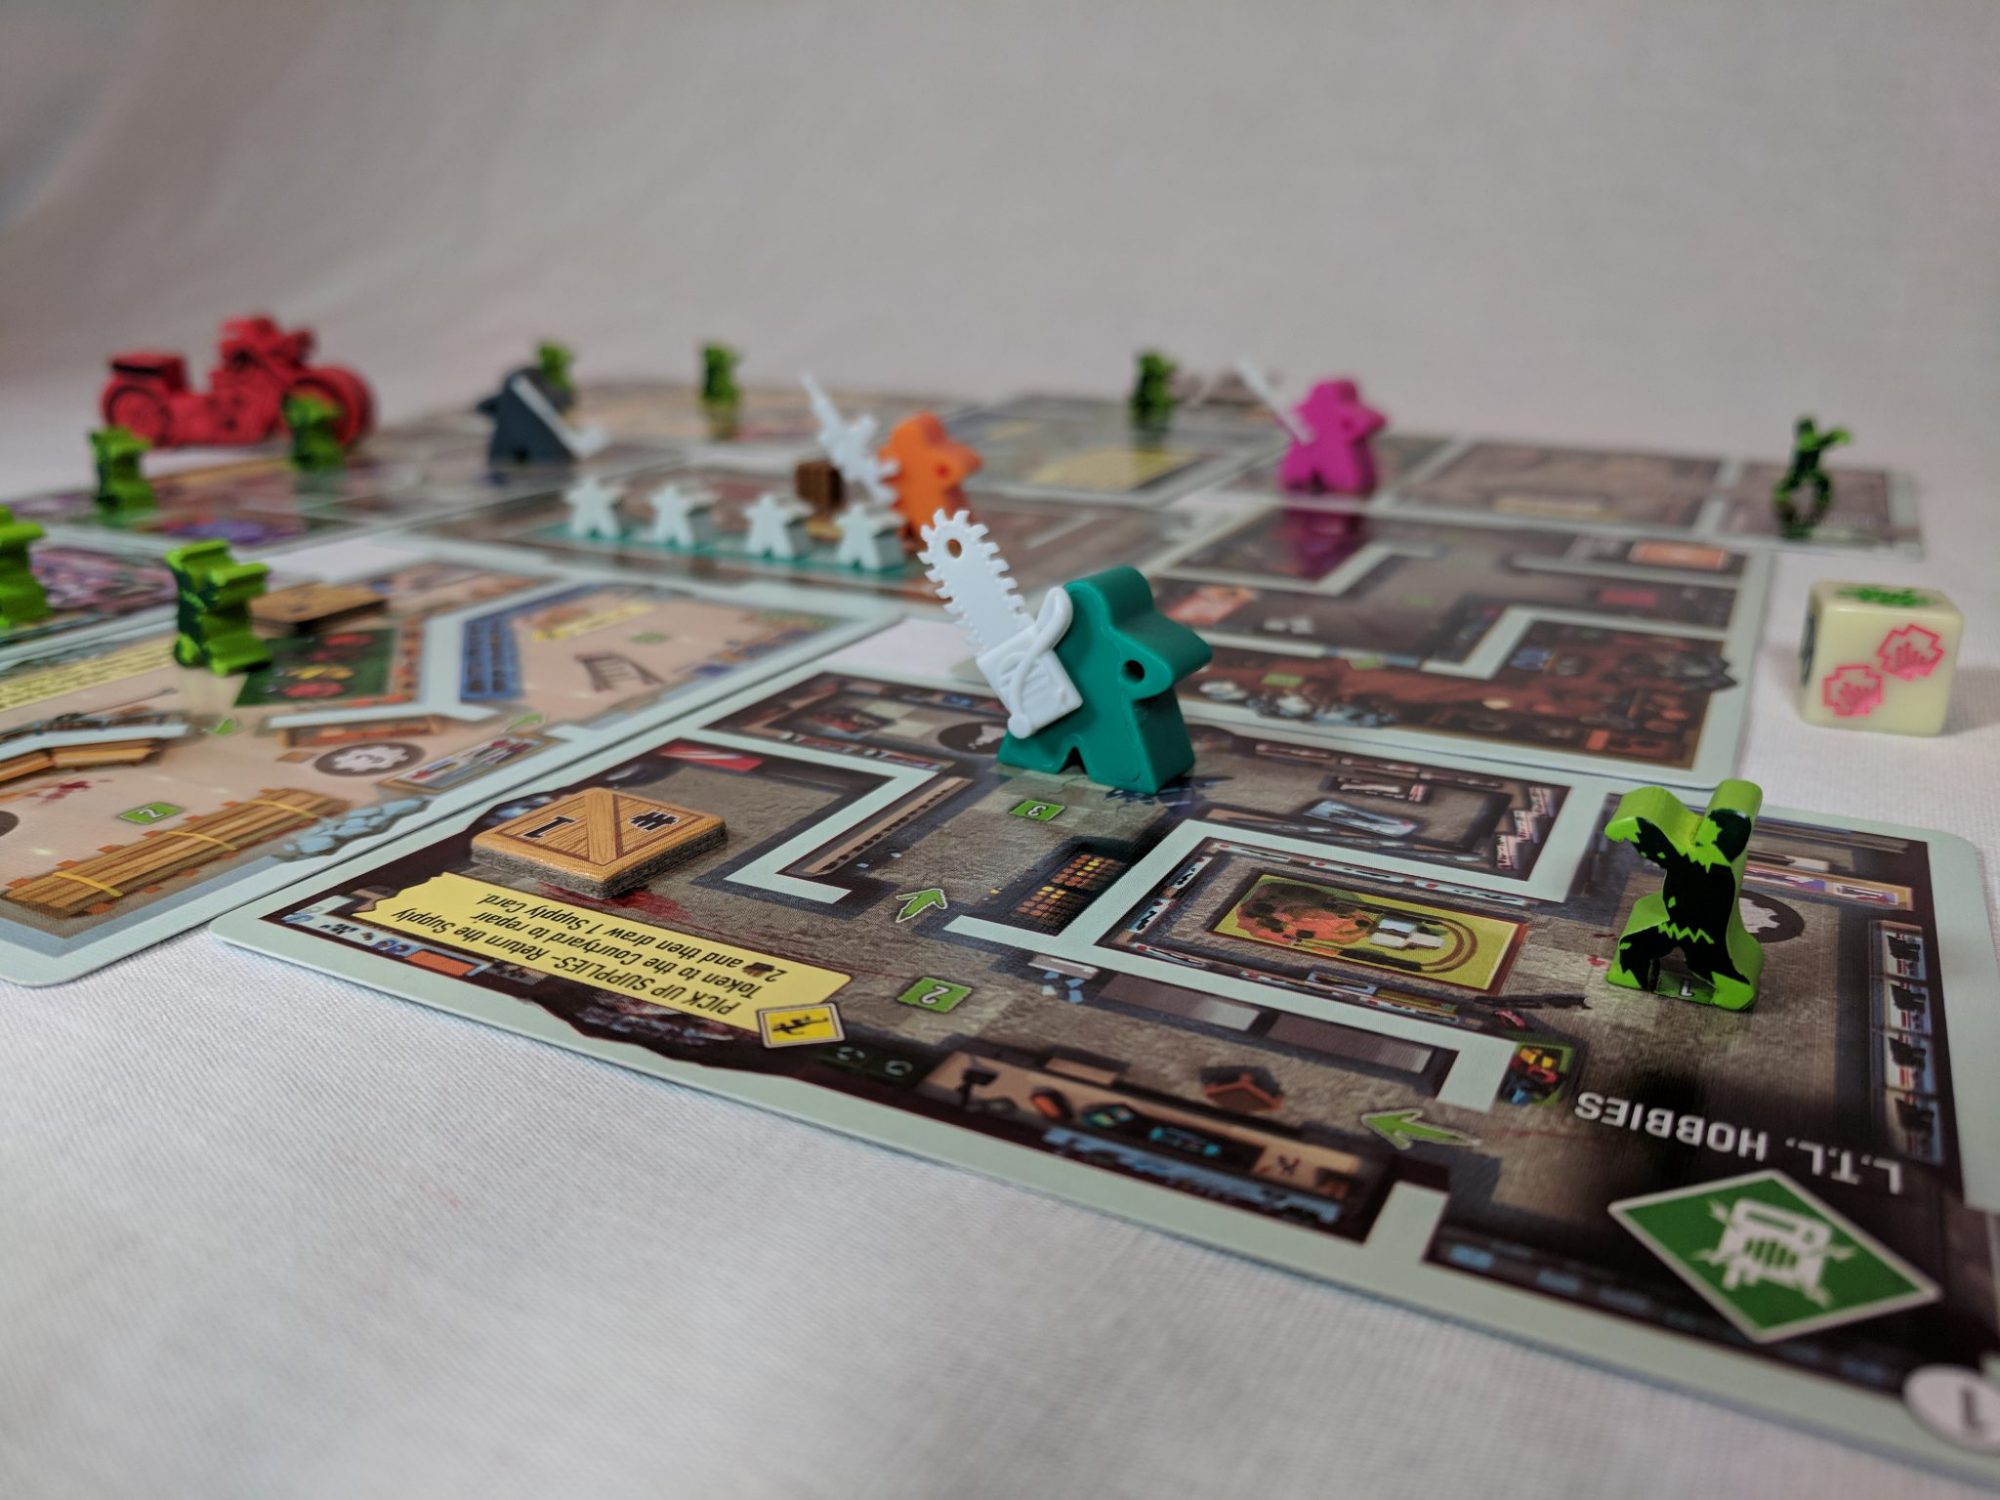 Tiny Epic Zombies - Zombies Meeple by ncsandor